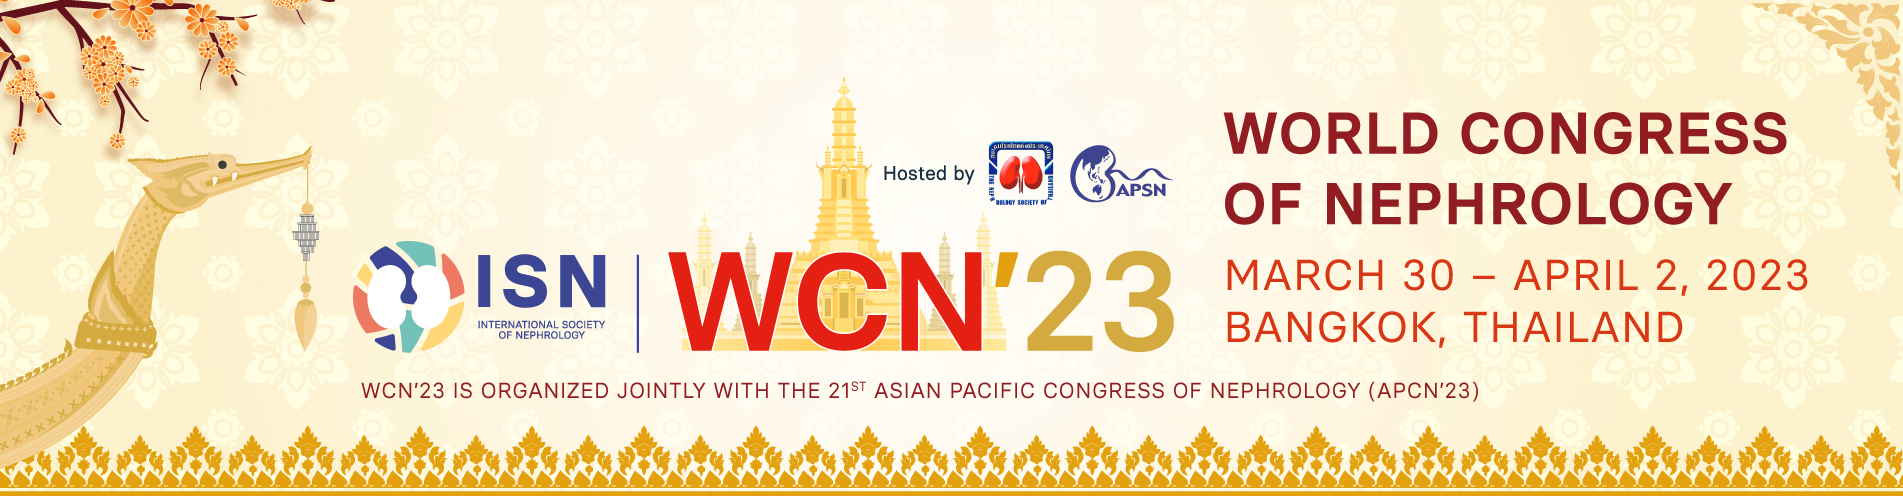 Join the ISN Wold Congress of Nephrology, Marc 30-April 2, 2023 in Bangkok, Thailand